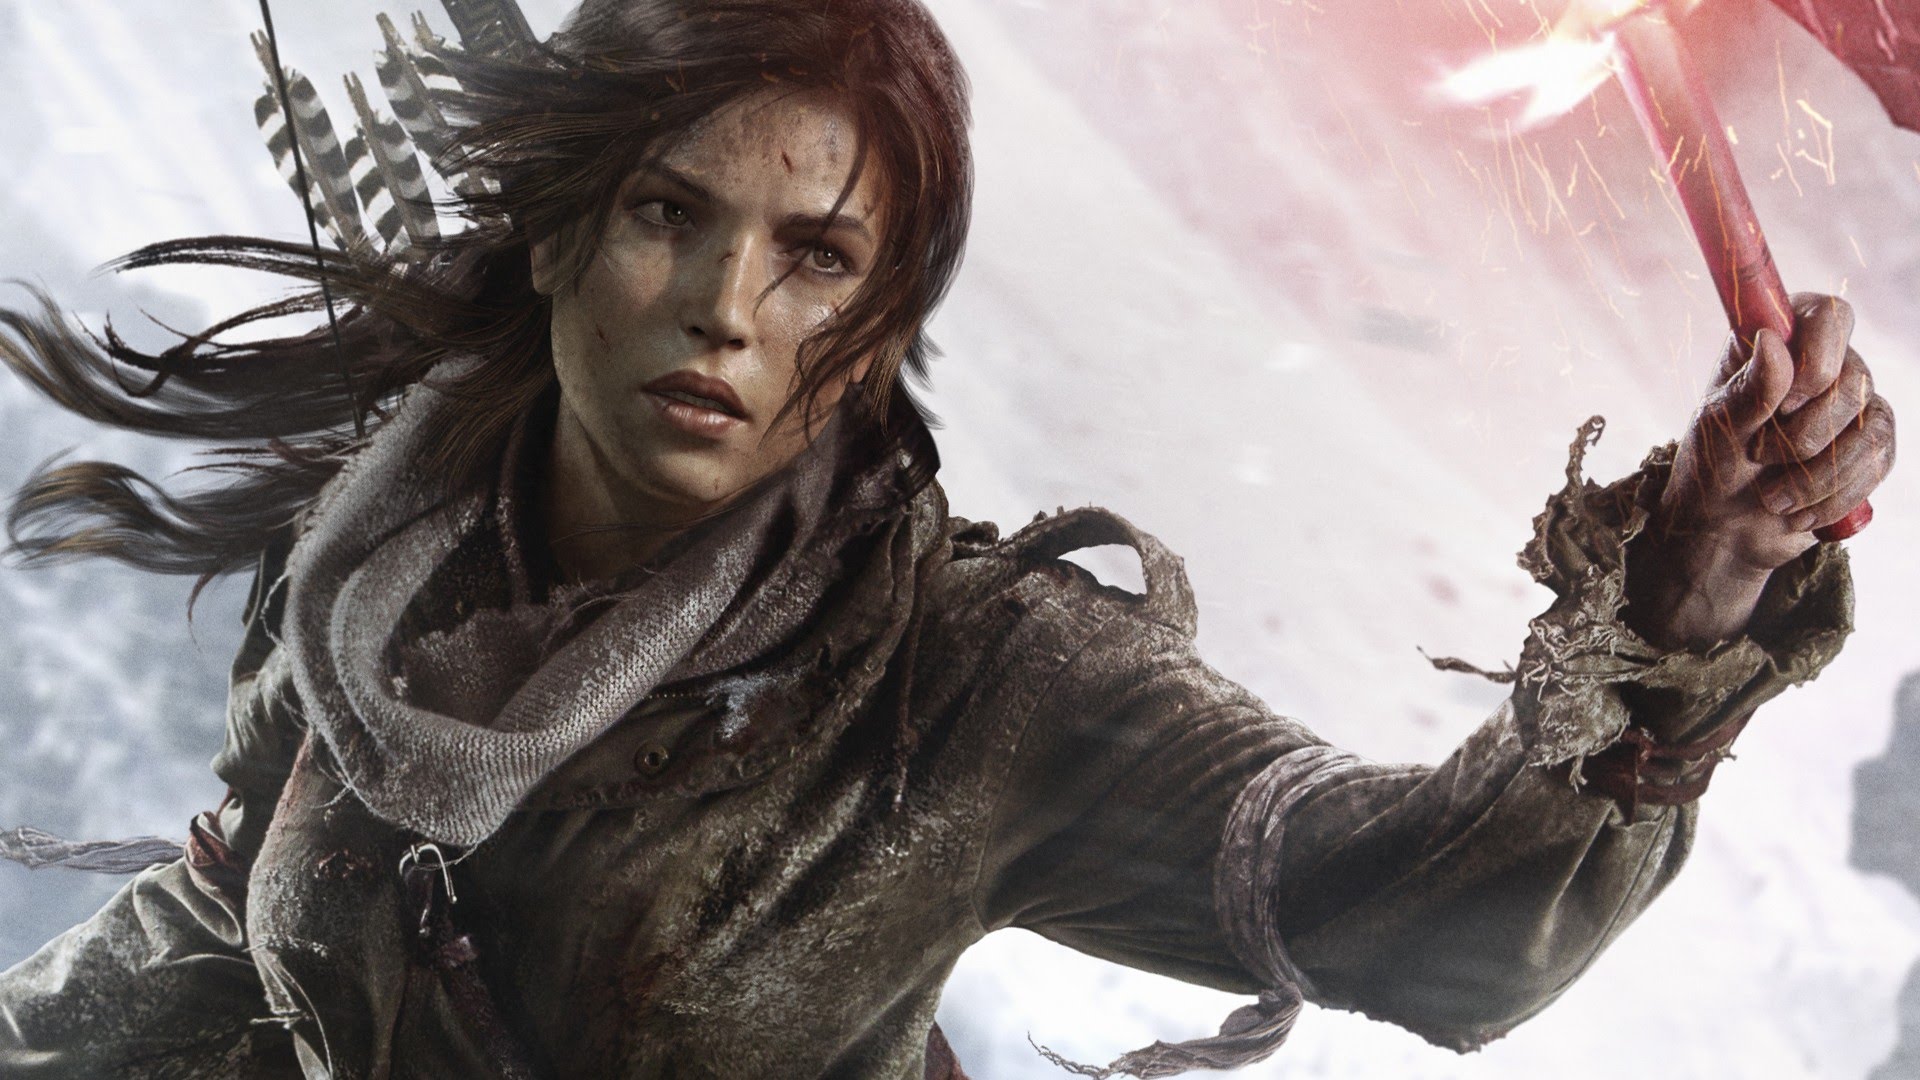 Rise of the Tomb Raider comes to PS4 in October.